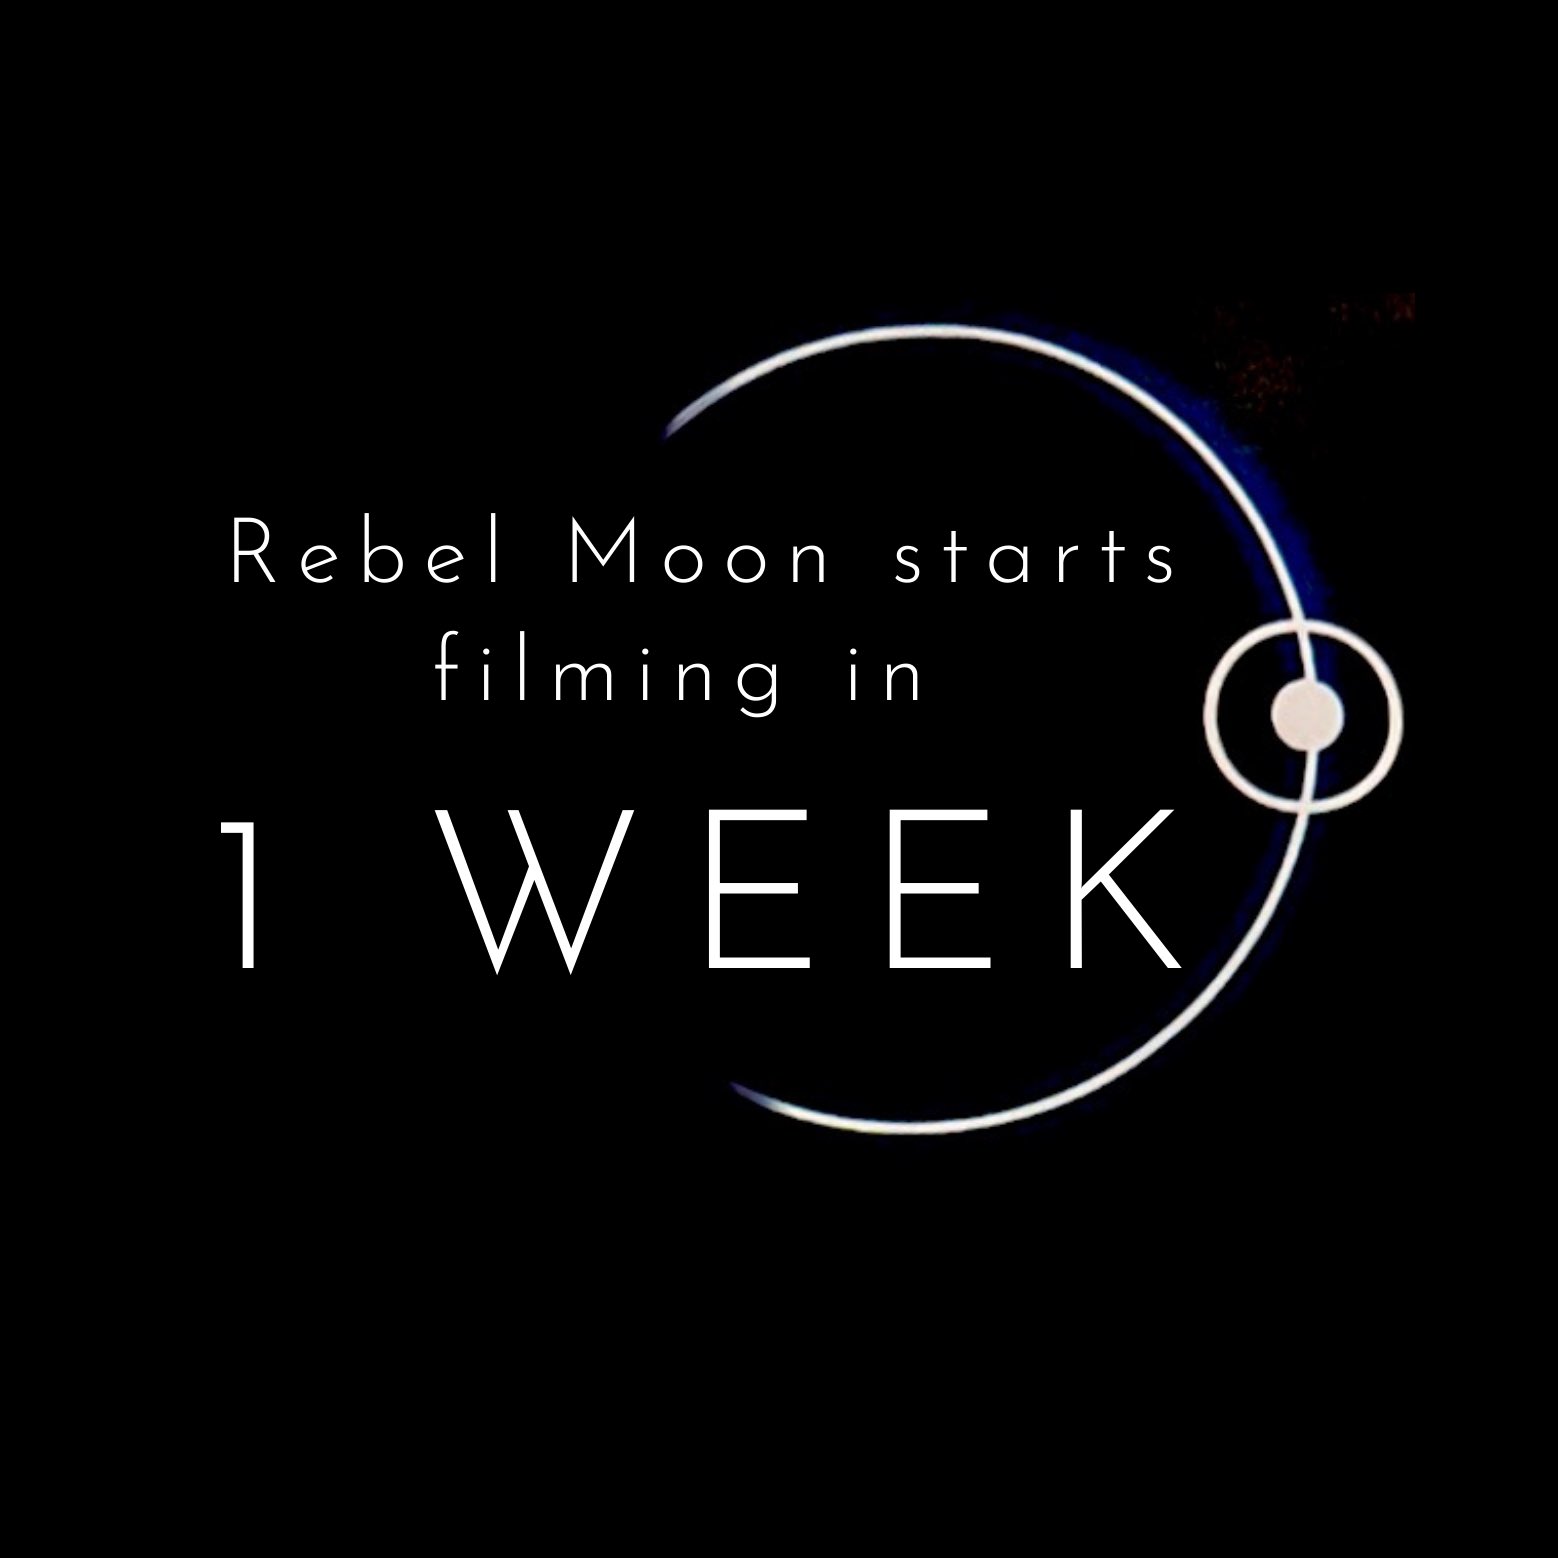 Rebel Moon release, cast plans, news, and what we've heard so far - Polygon